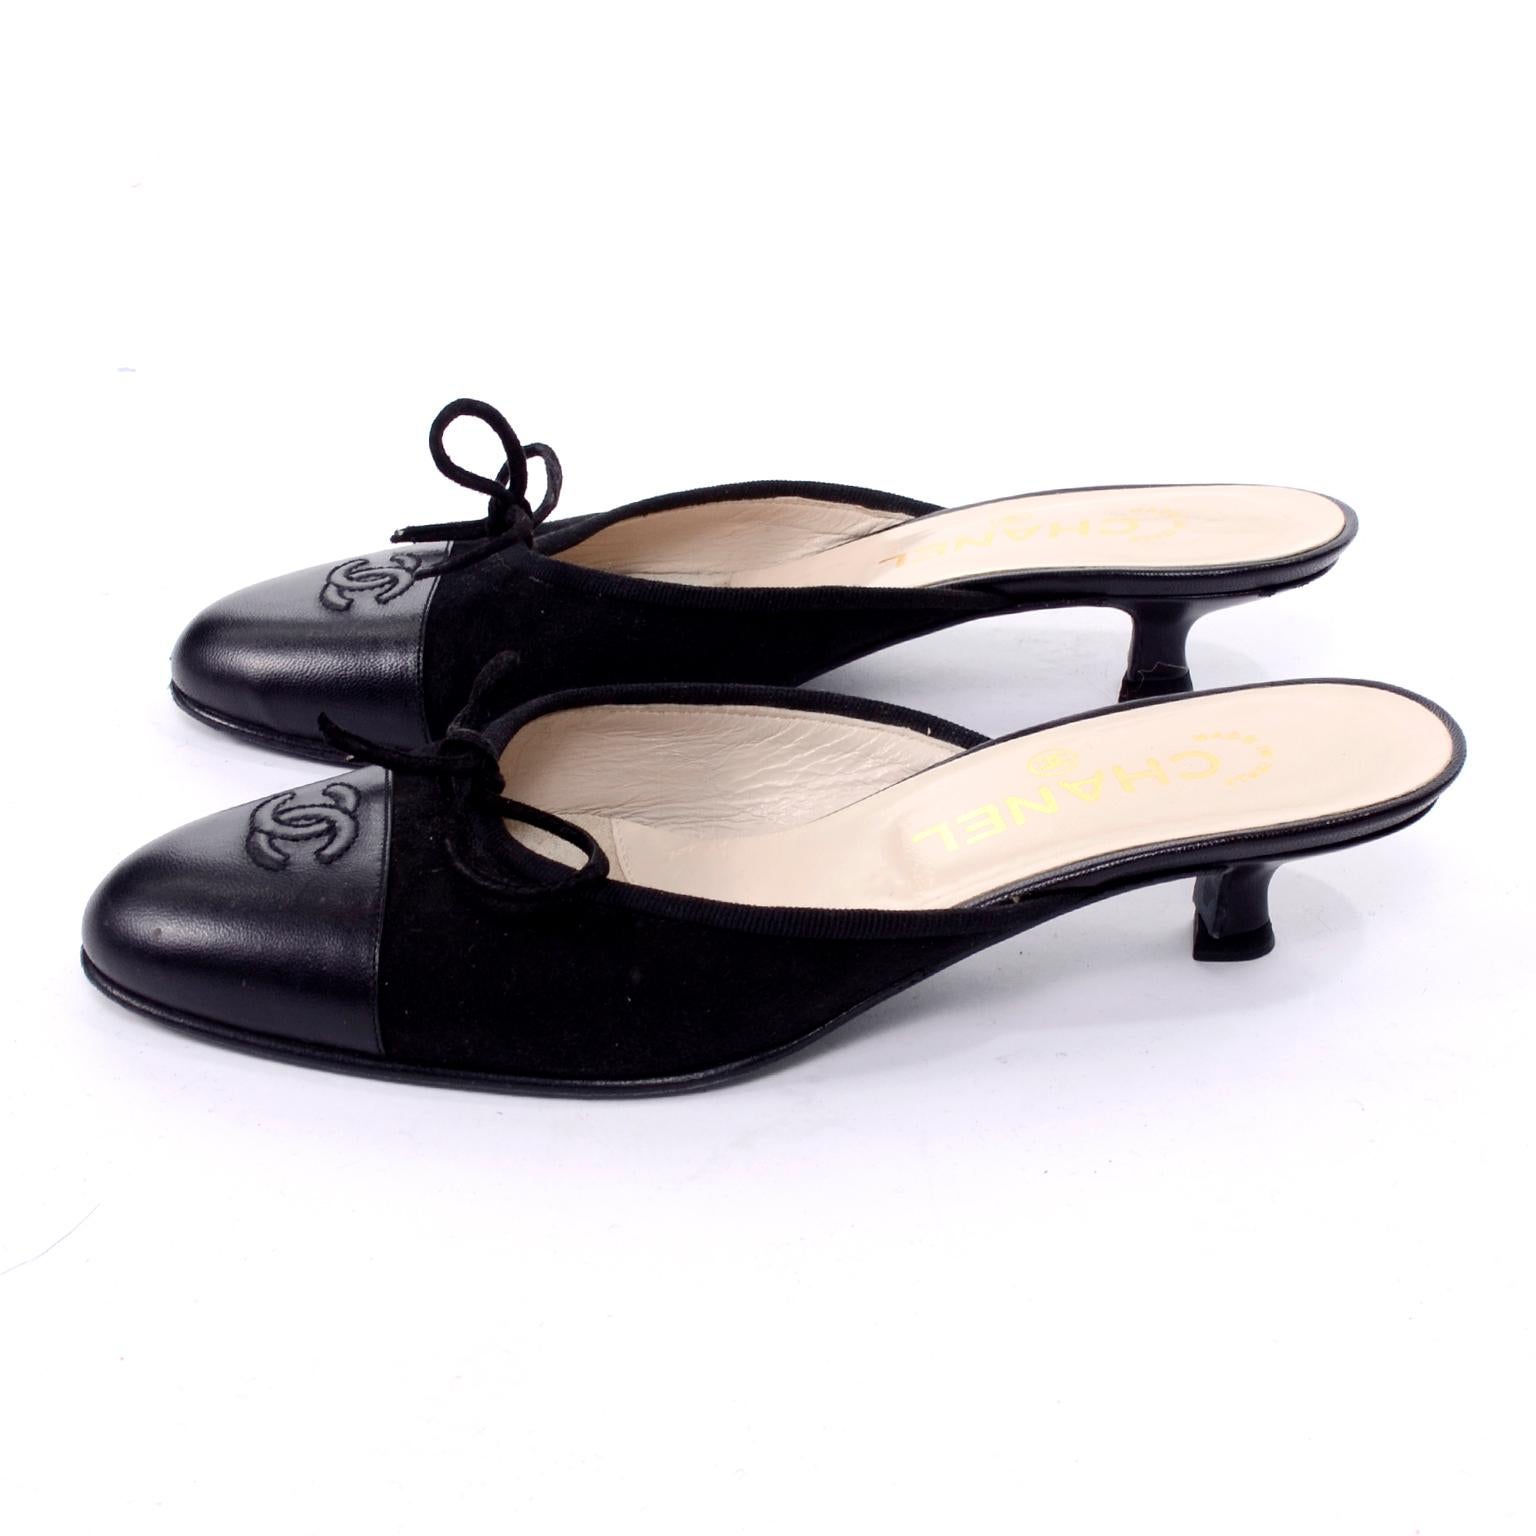 Chanel Black suede and smooth leather mules with bows and kitten heel. These shoes show the normal surface sole wear but are otherwise in good condition.  CC monogram logo is on the toe and they are labeled a size 36.